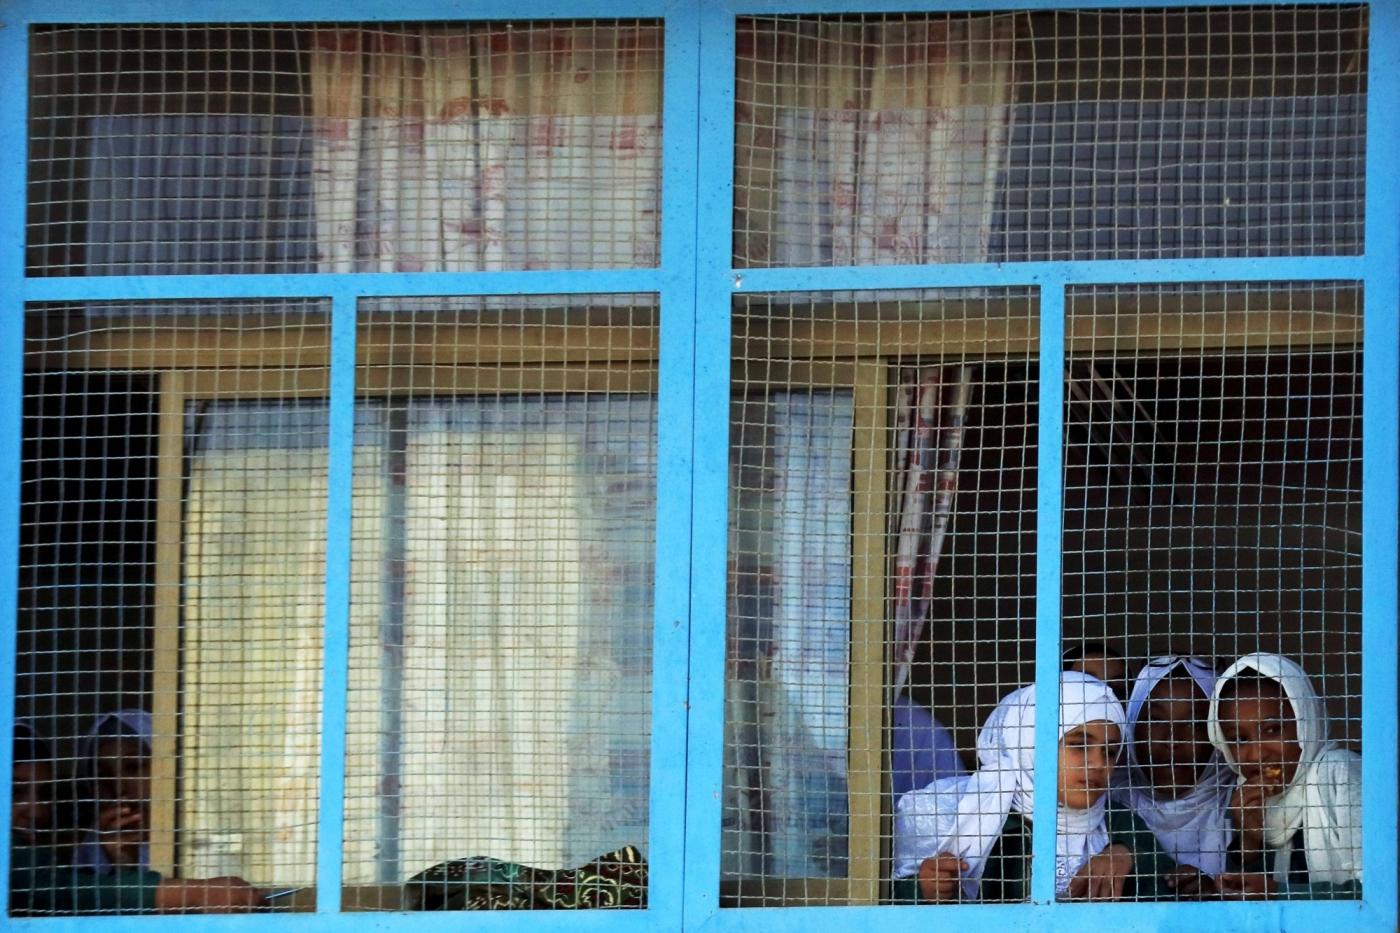 AMMAN, Oct. 17, 2018 (Xinhua) -- Palestinian refugee students look out of the window at a school of Baqa'a Palestinian refugee camp in Amman, Jordan, on Oct. 16, 2018. (Xinhua/Mohammad Abu Ghosh/IANS) by .